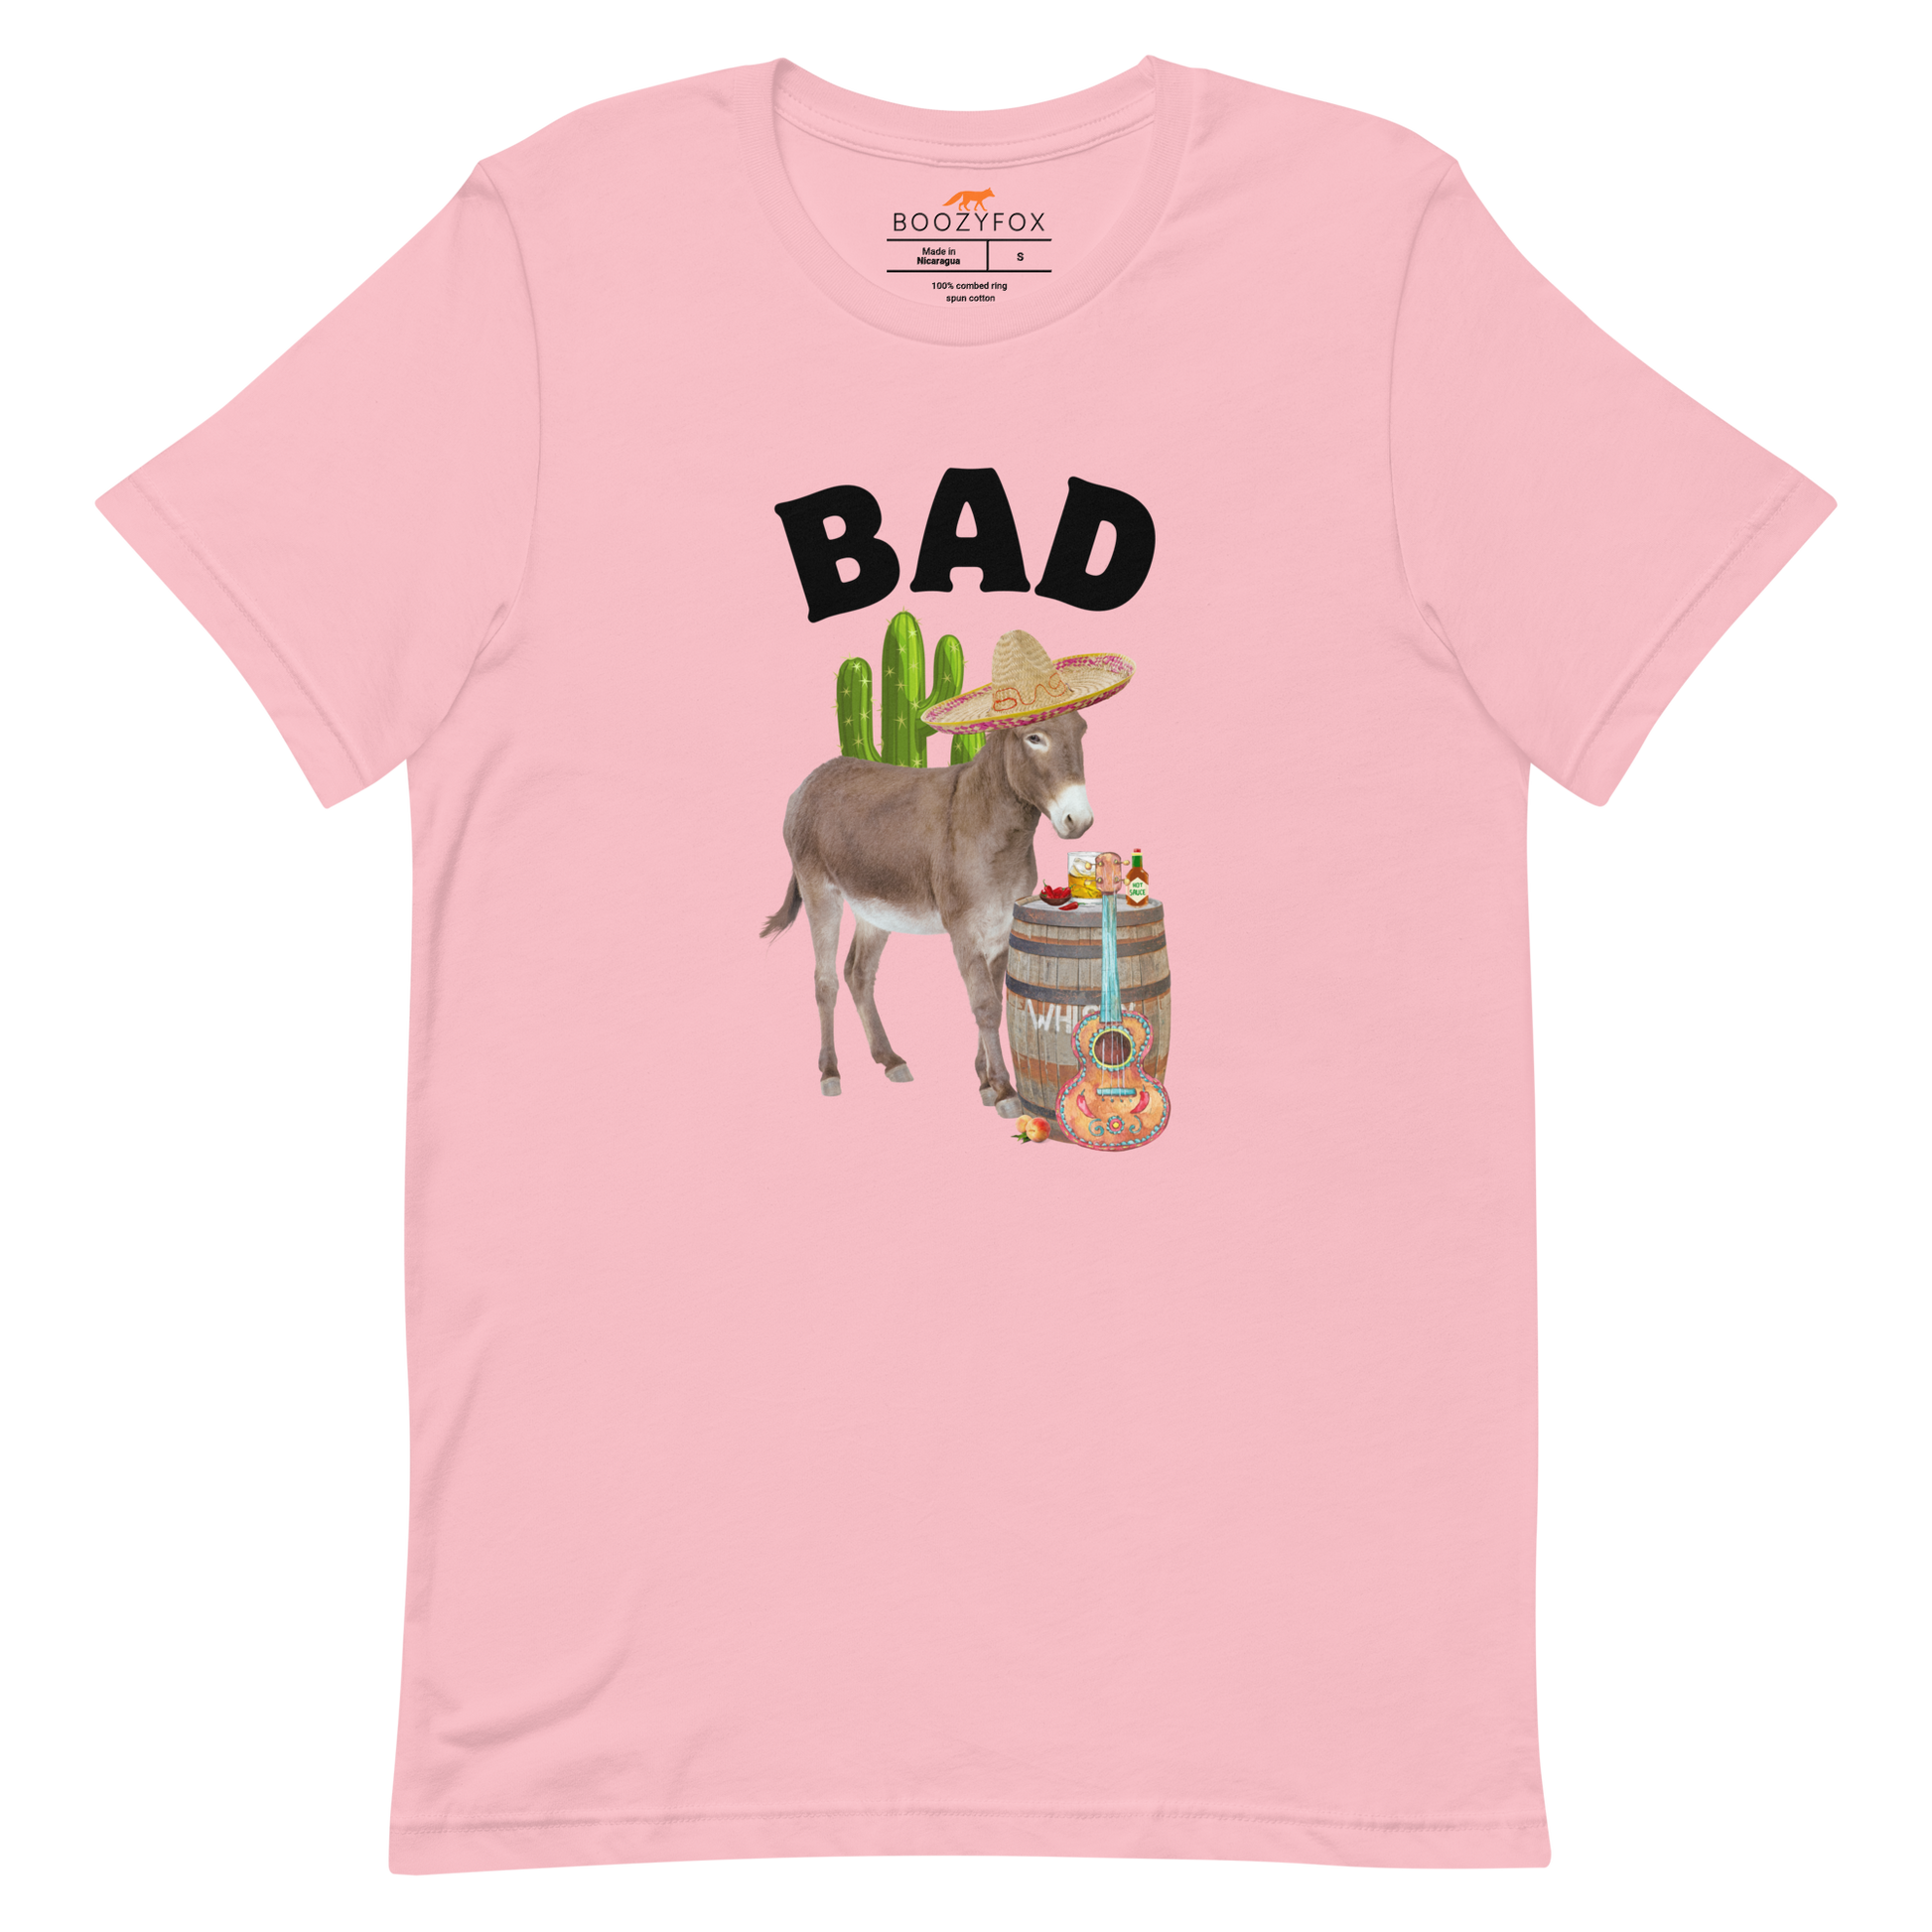 Pink Premium Donkey Tee featuring a Funny Bad Ass Donkey graphic on the chest - Funny Graphic Bad Ass Donkey Tees - Boozy Fox